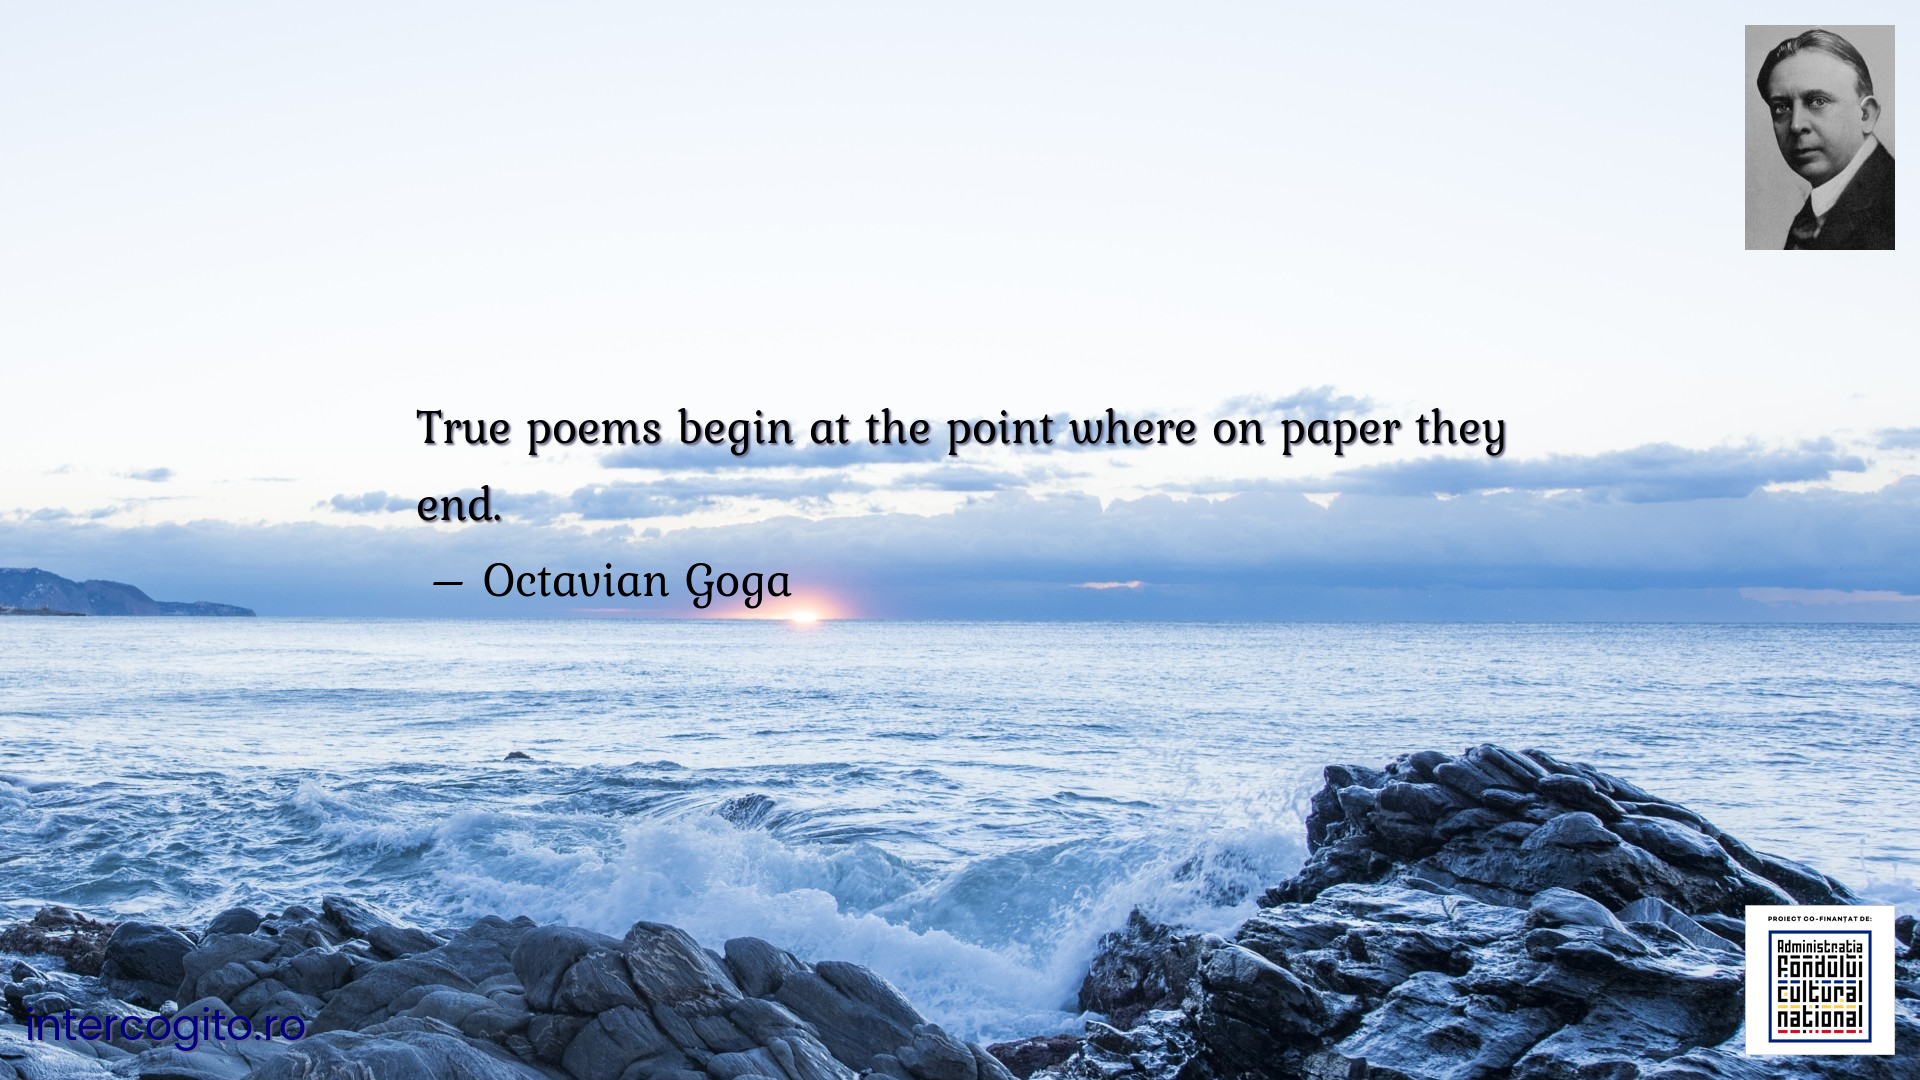 True poems begin at the point where on paper they end.